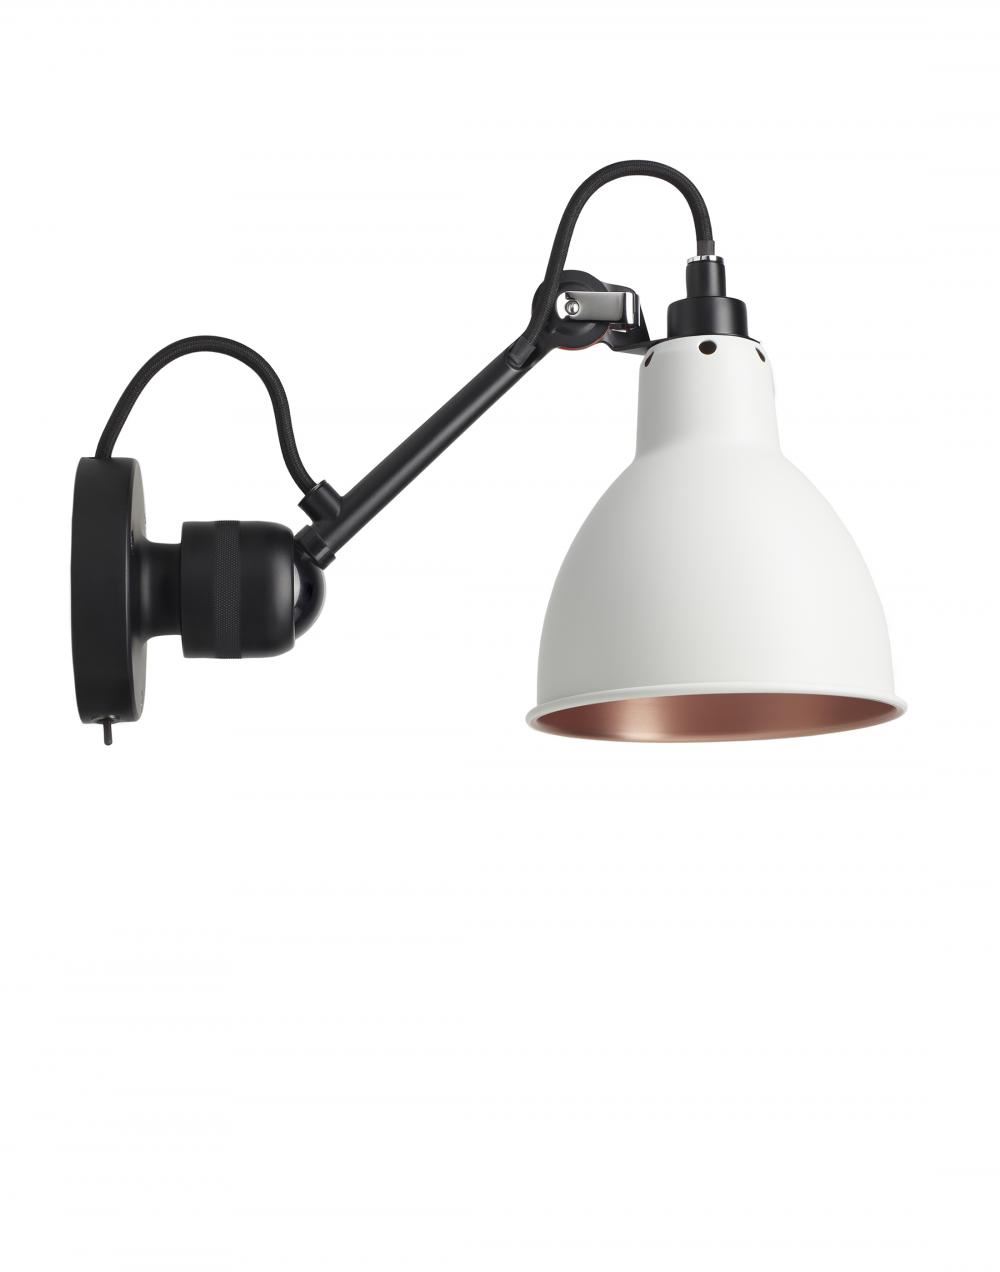 Lampe Gras 304 Small Wall Light Black Arm White Shade With Copper Interior Round Integral Switch